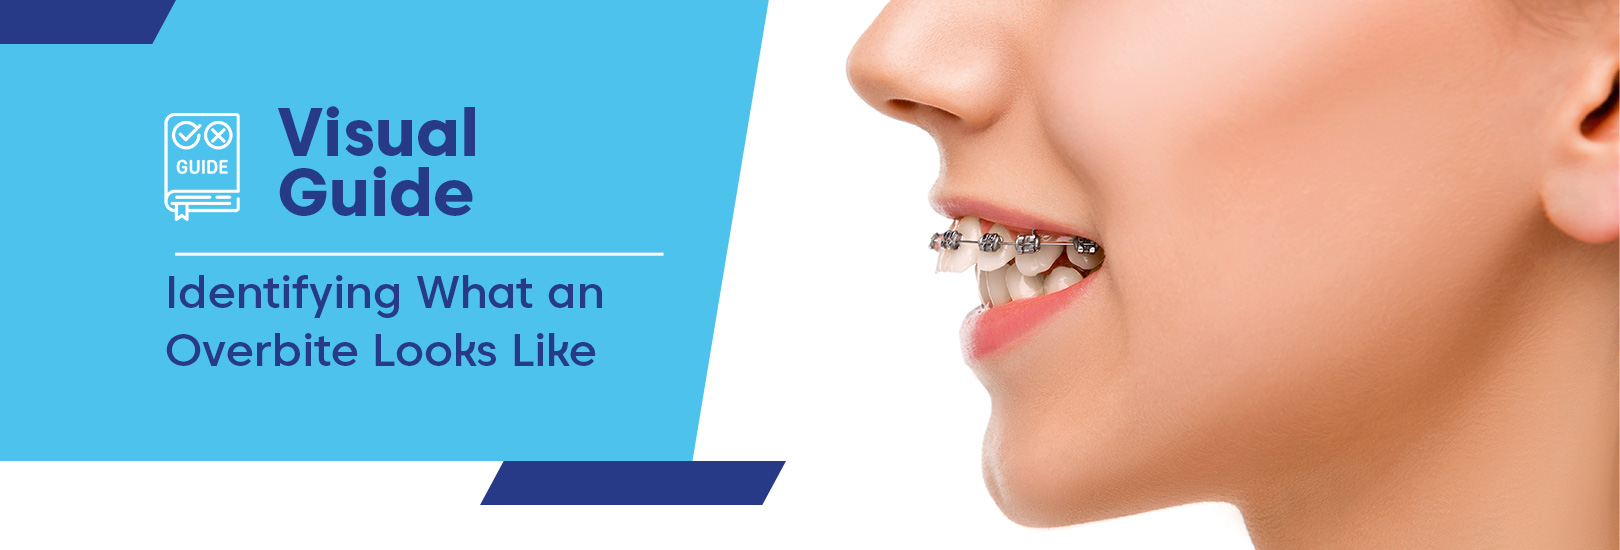 Overbite Correction: Can Braces Fix an Overbite?